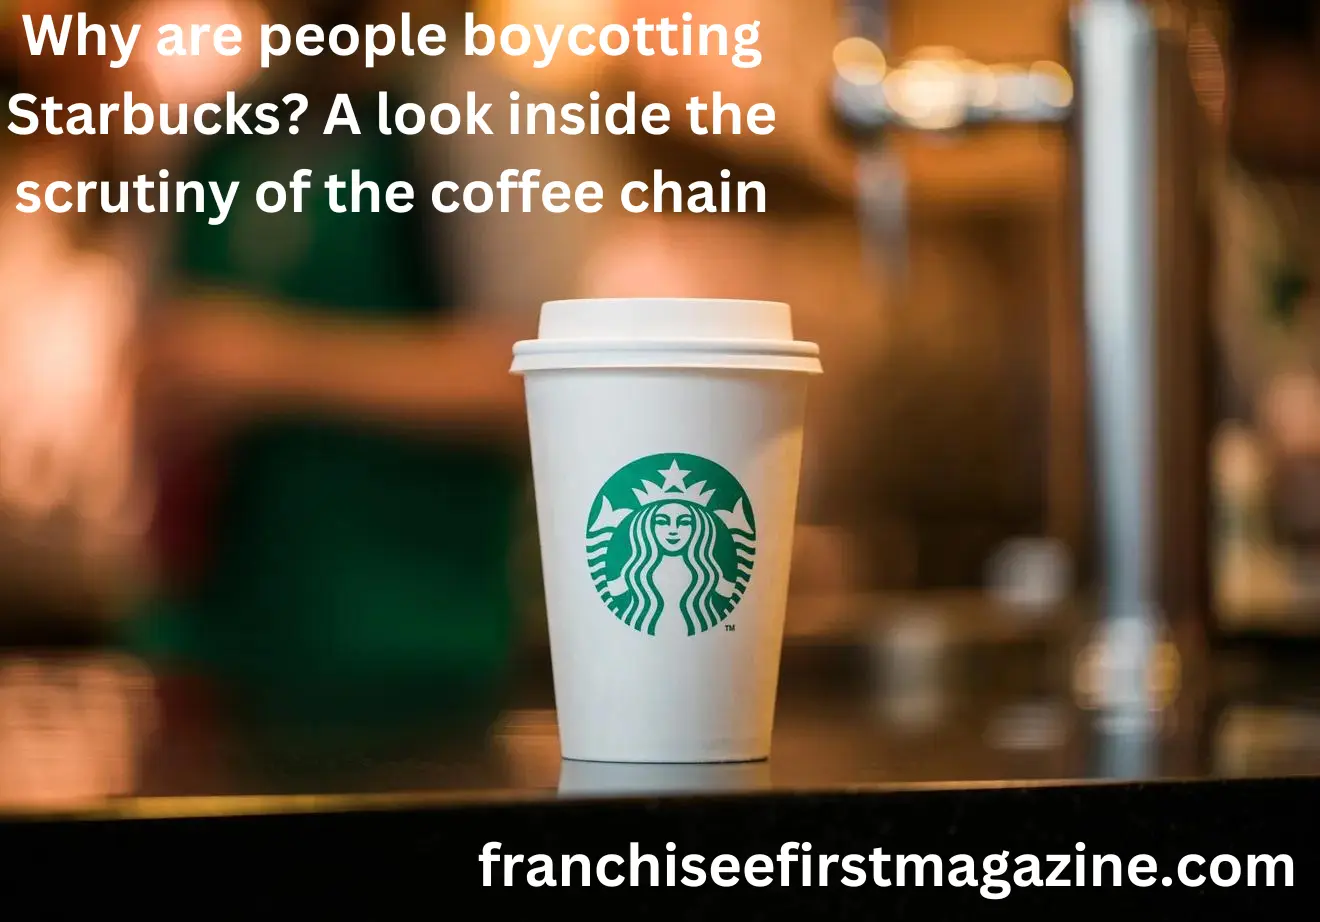 Why are people boycotting Starbucks? A look inside the scrutiny of the coffee chain